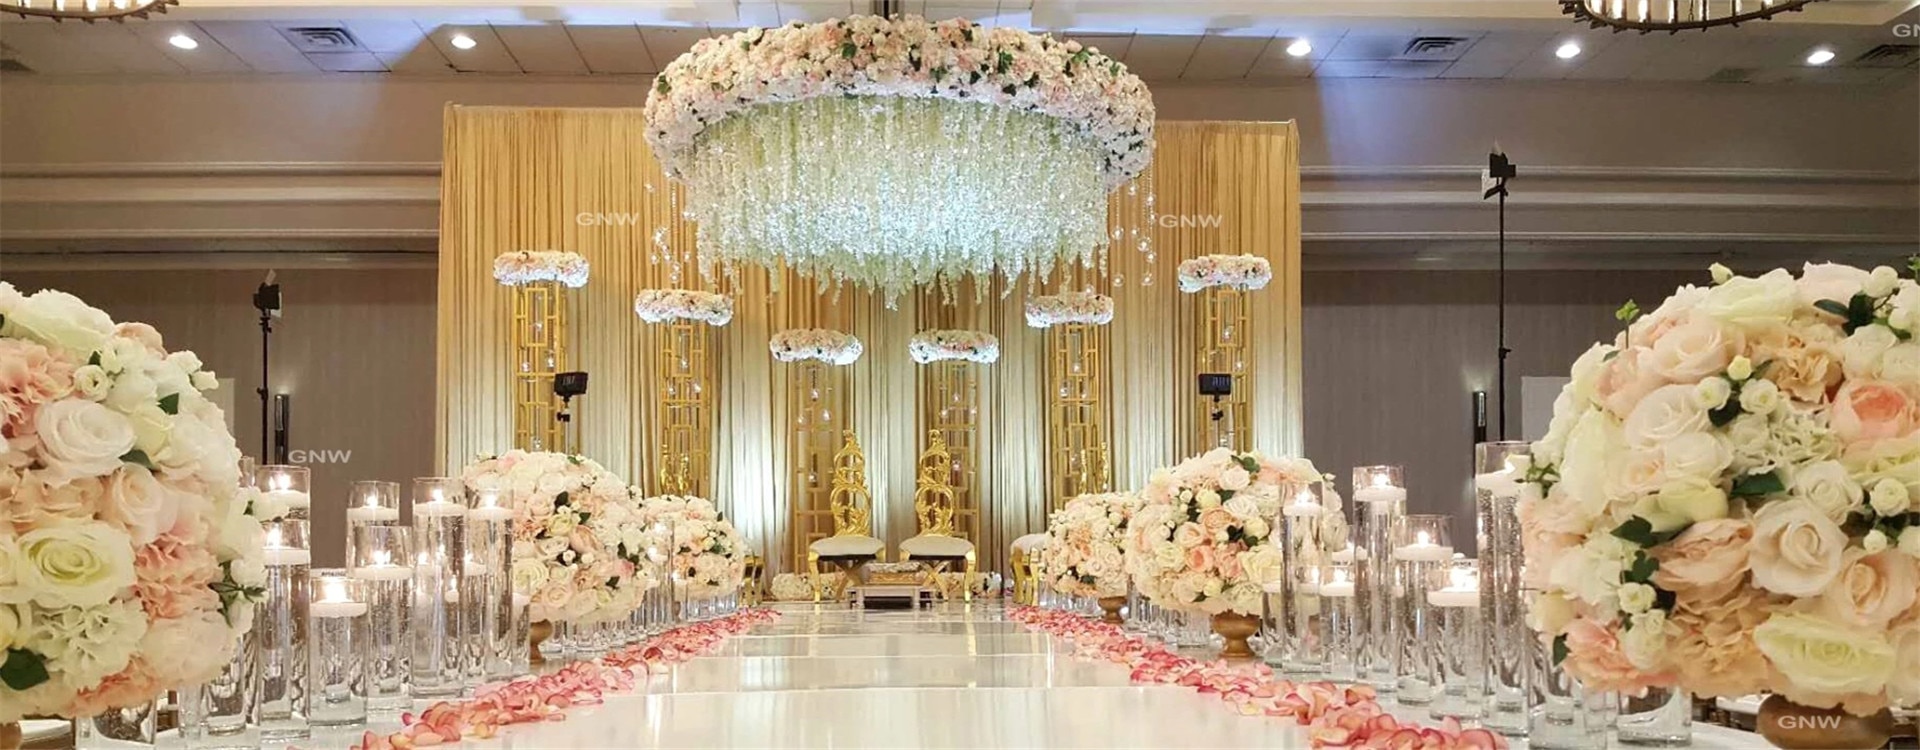 Wedding Lounge: A Trendy Addition to Enhance Guest Experience